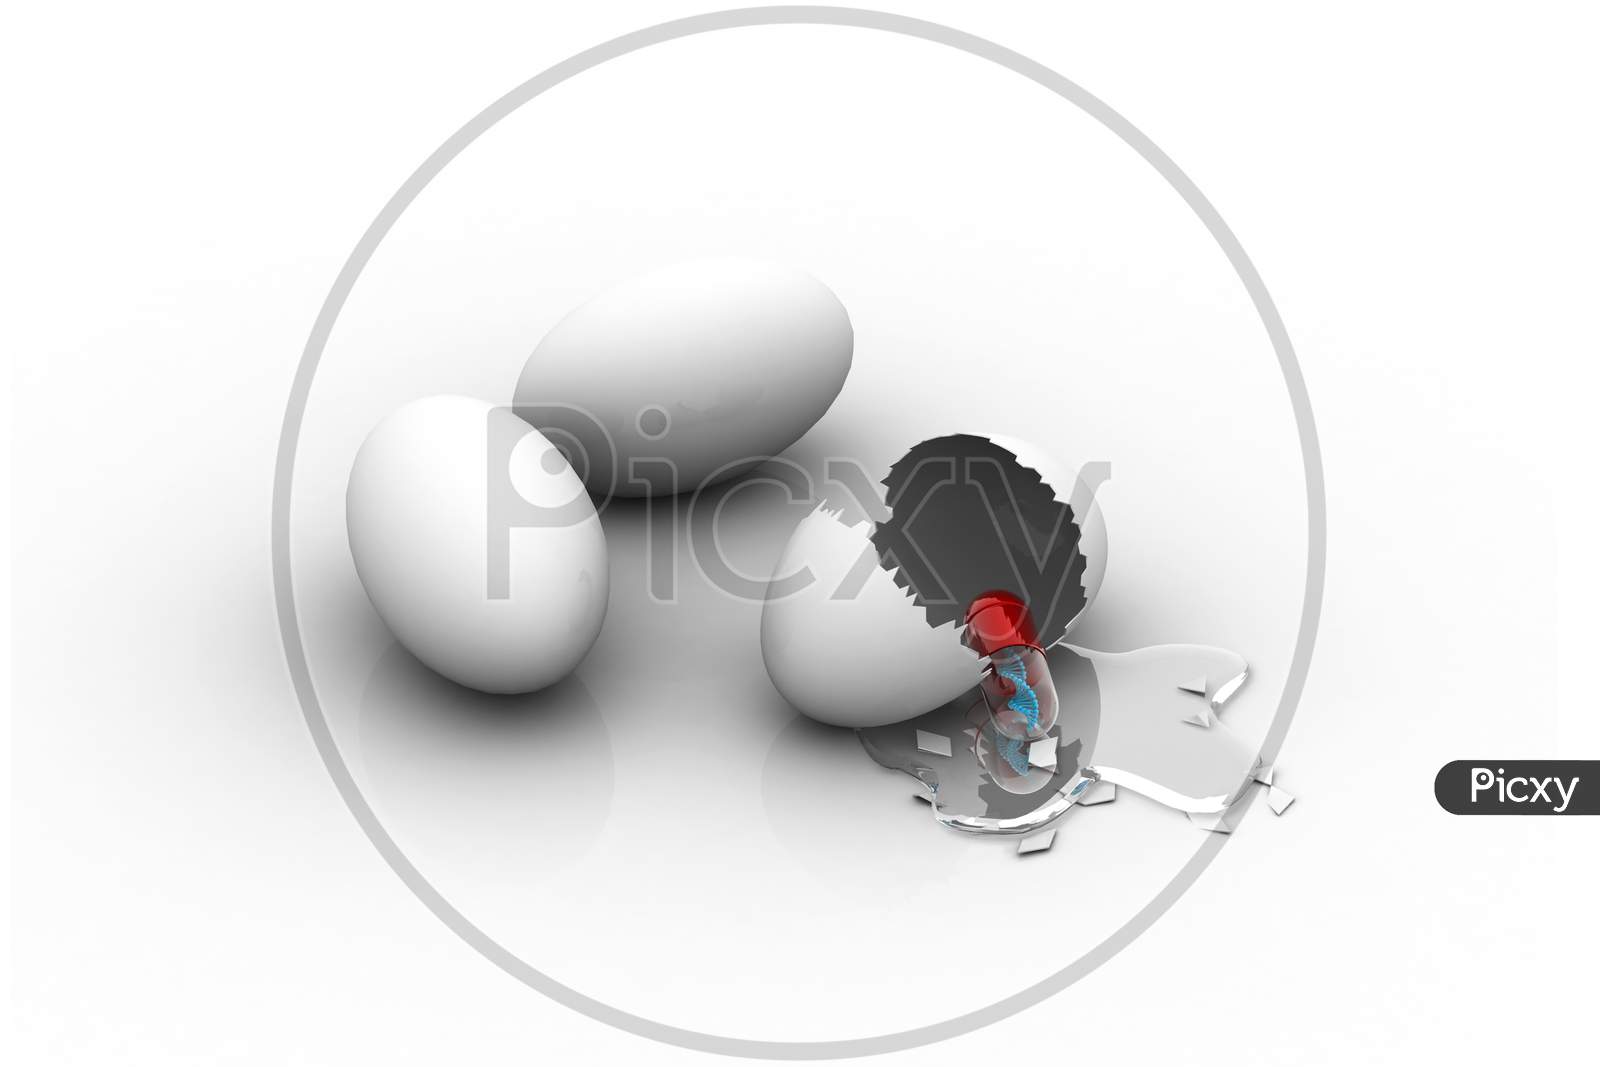 Egg And Dna Filled Pill. Conceptual Design